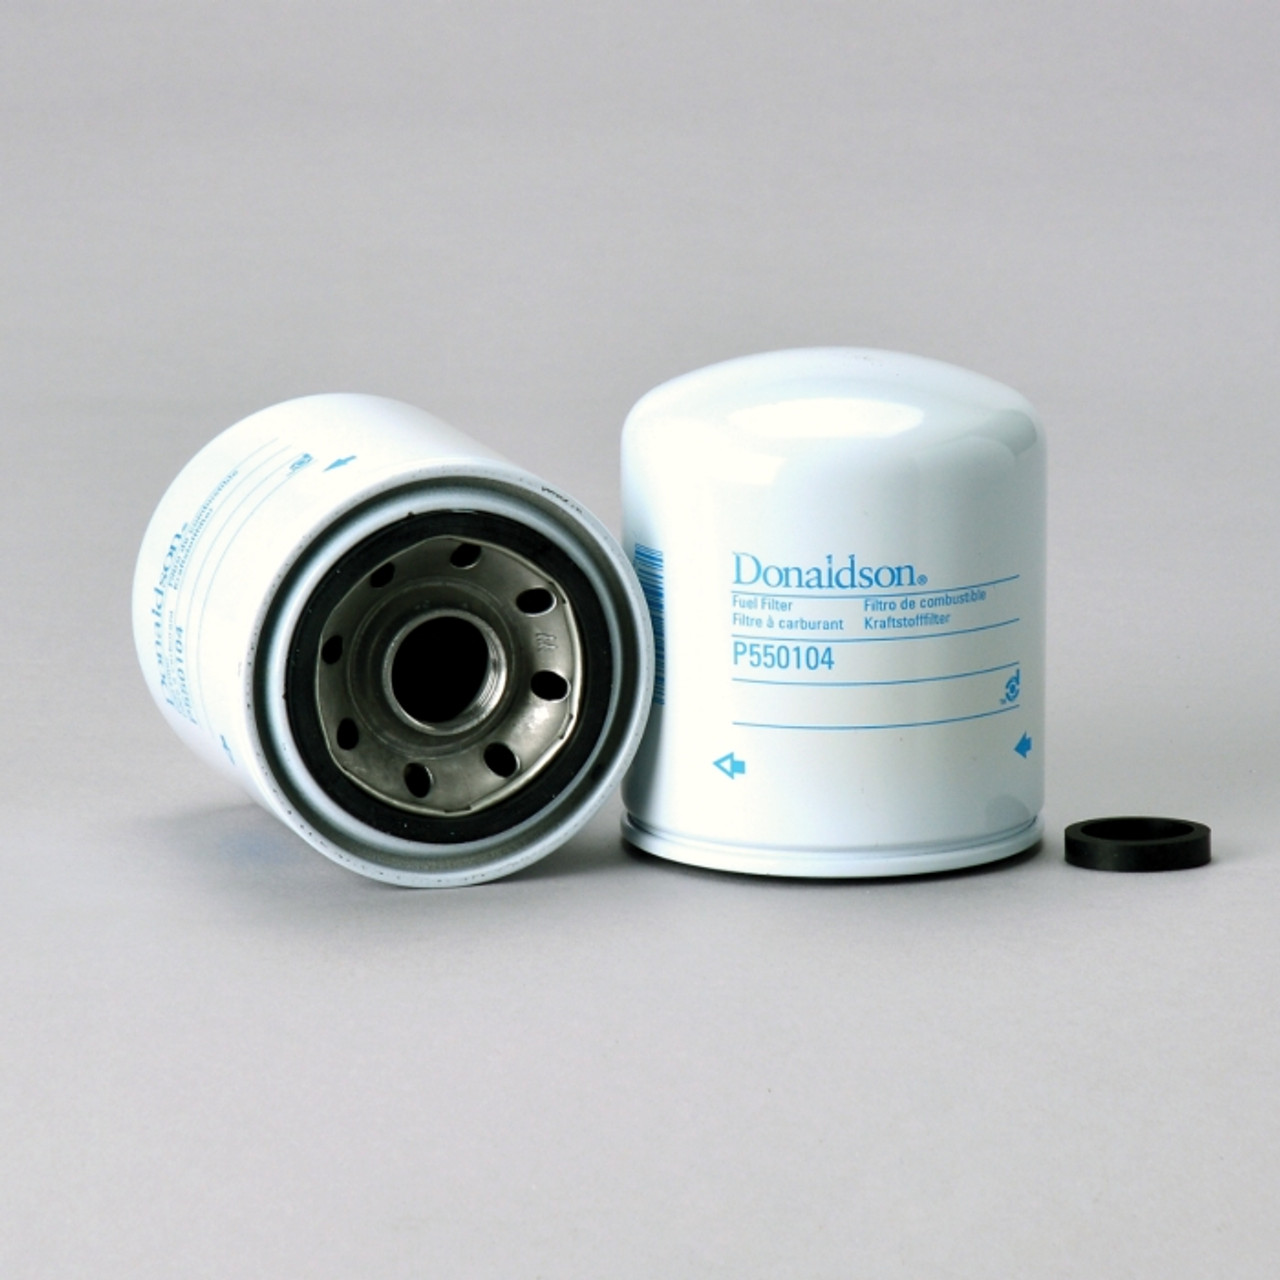 Donaldson P550104 Fuel Filter, Spin-on